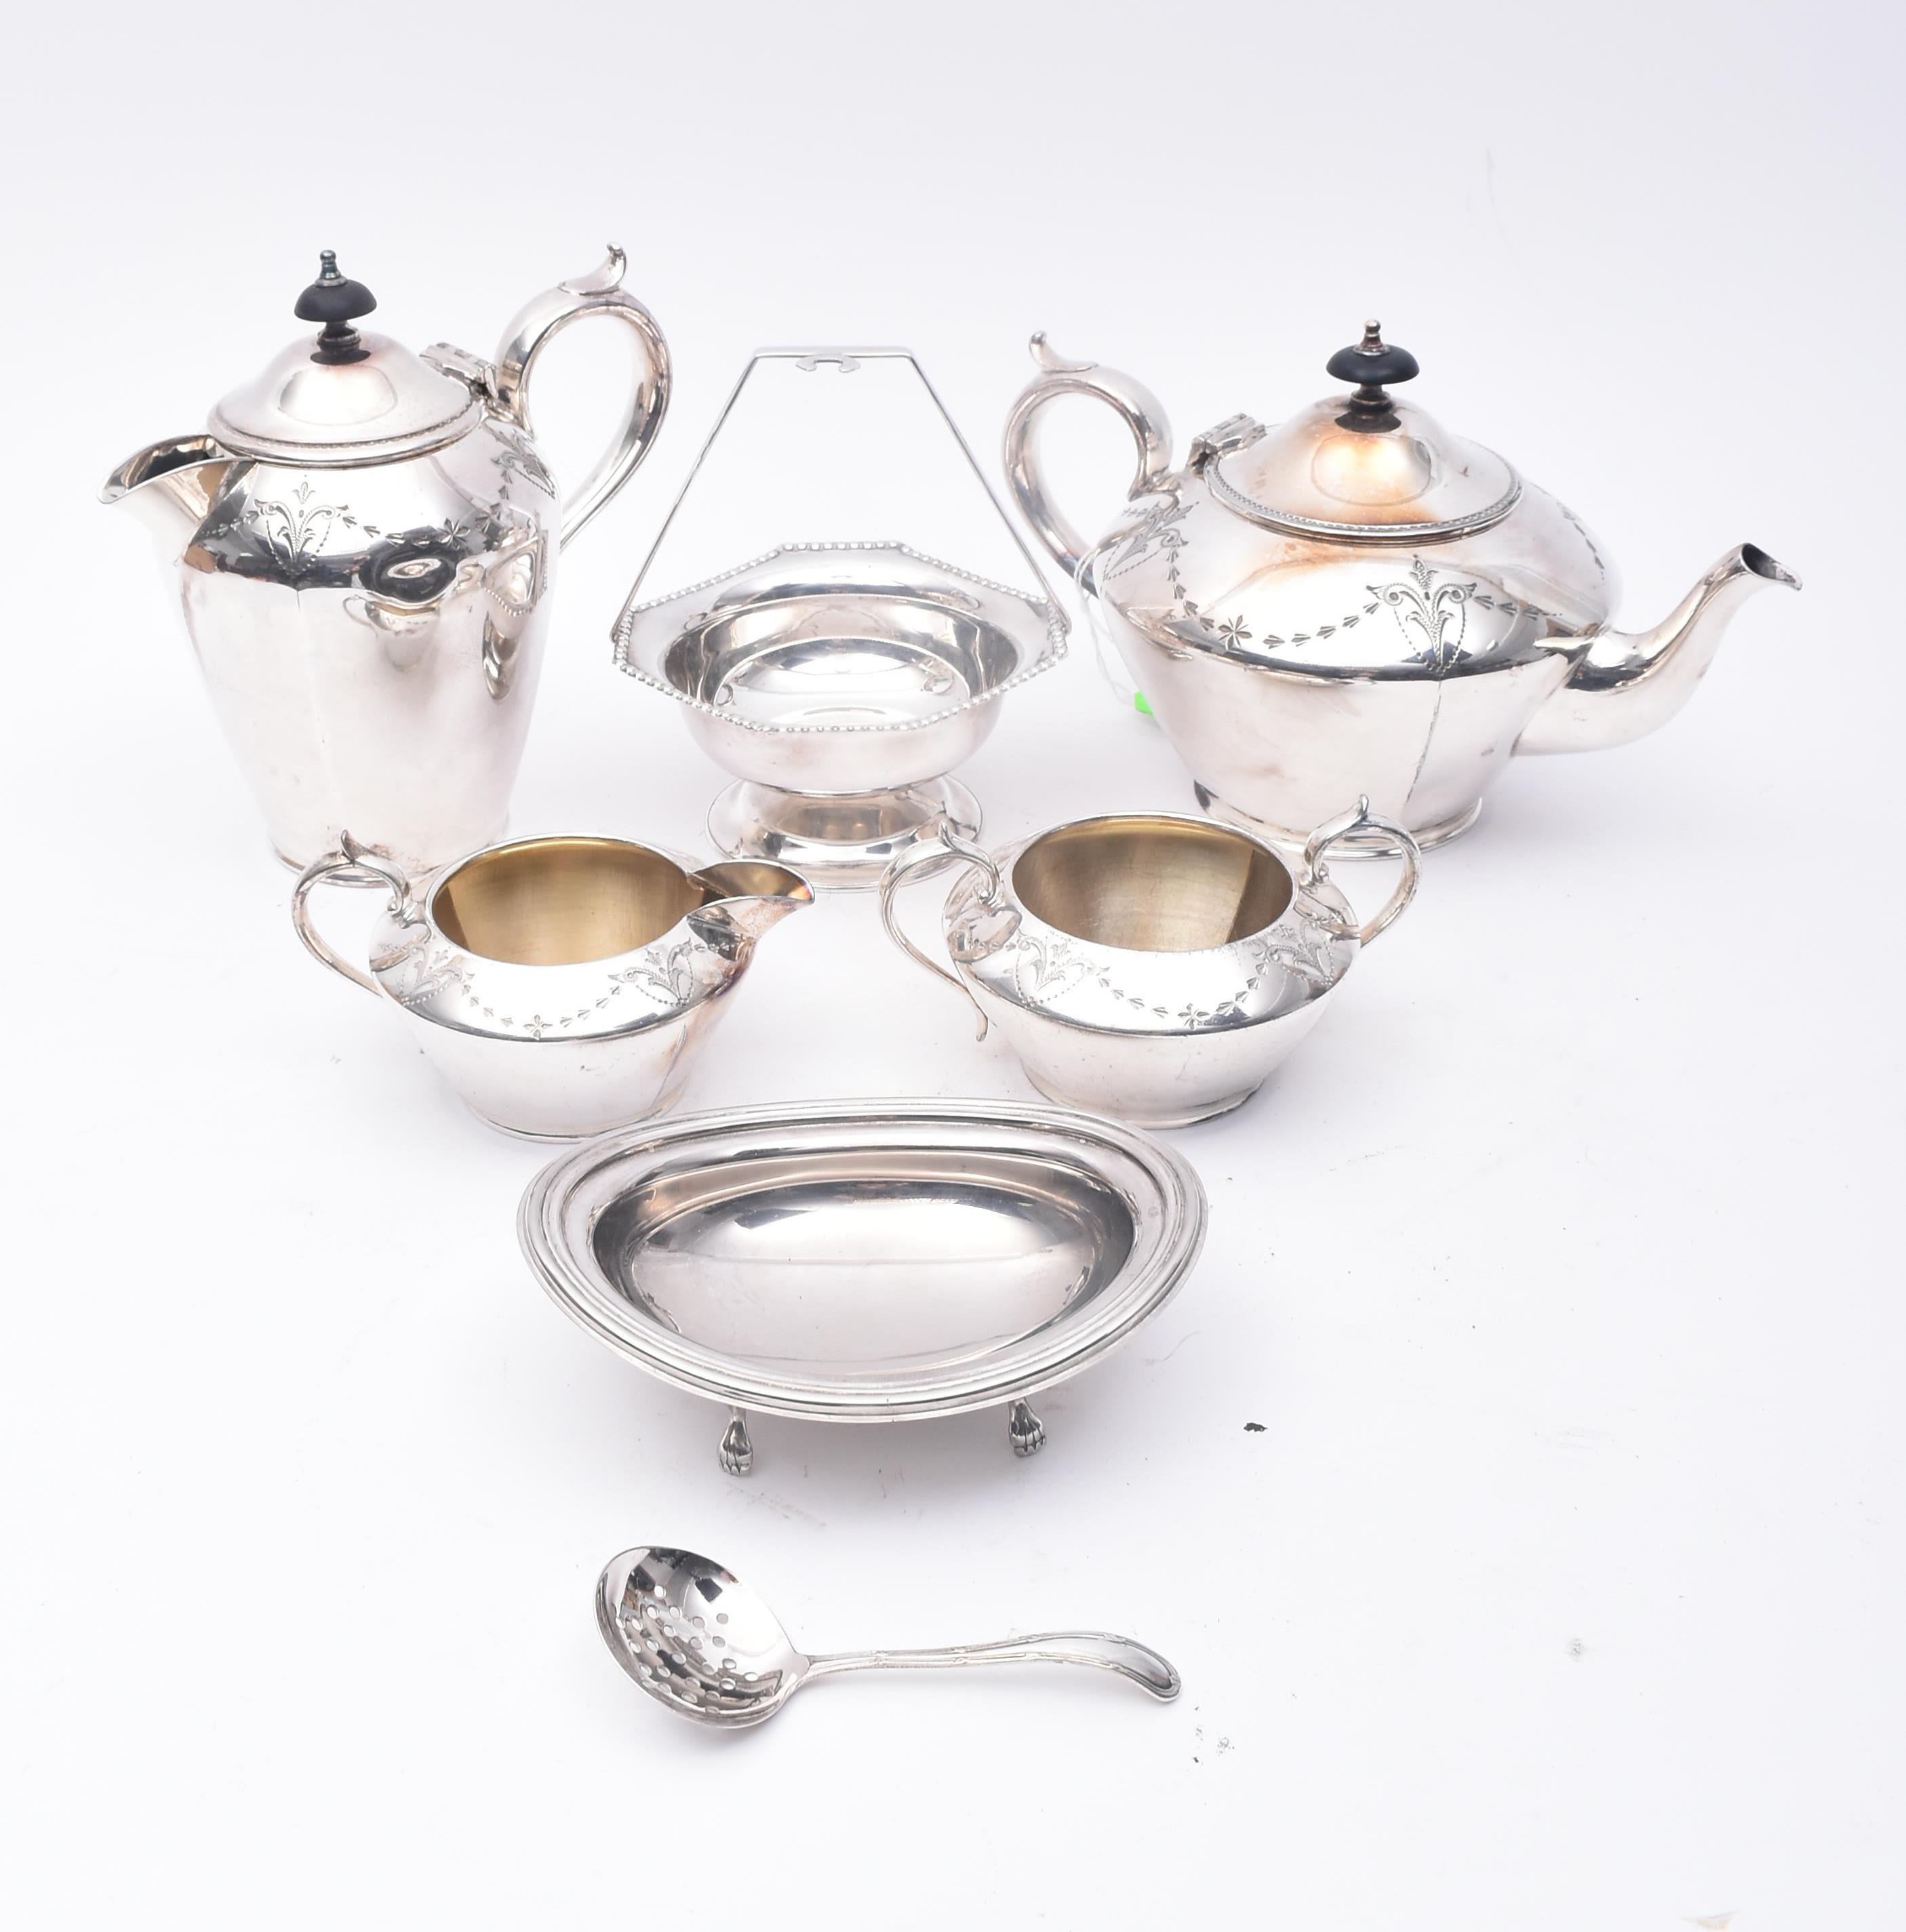 EARLY 20TH CENTURY SILVER PLATED TEA SERVICE WITH TEAPOT - Image 2 of 10